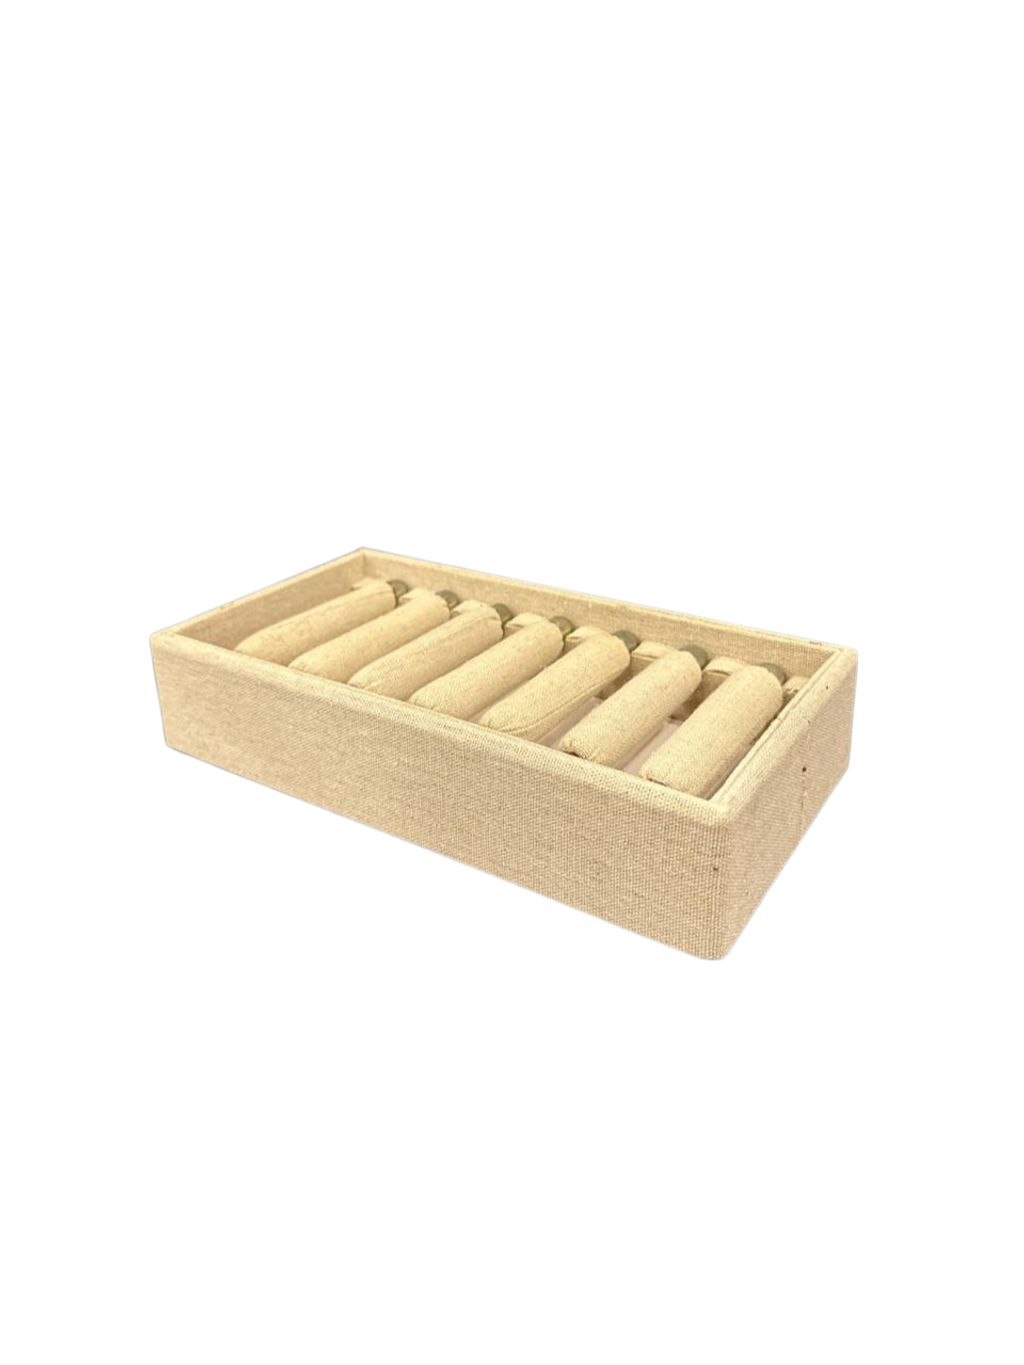 541003BE - Ring Tray with 7 Sticks (Beige)_